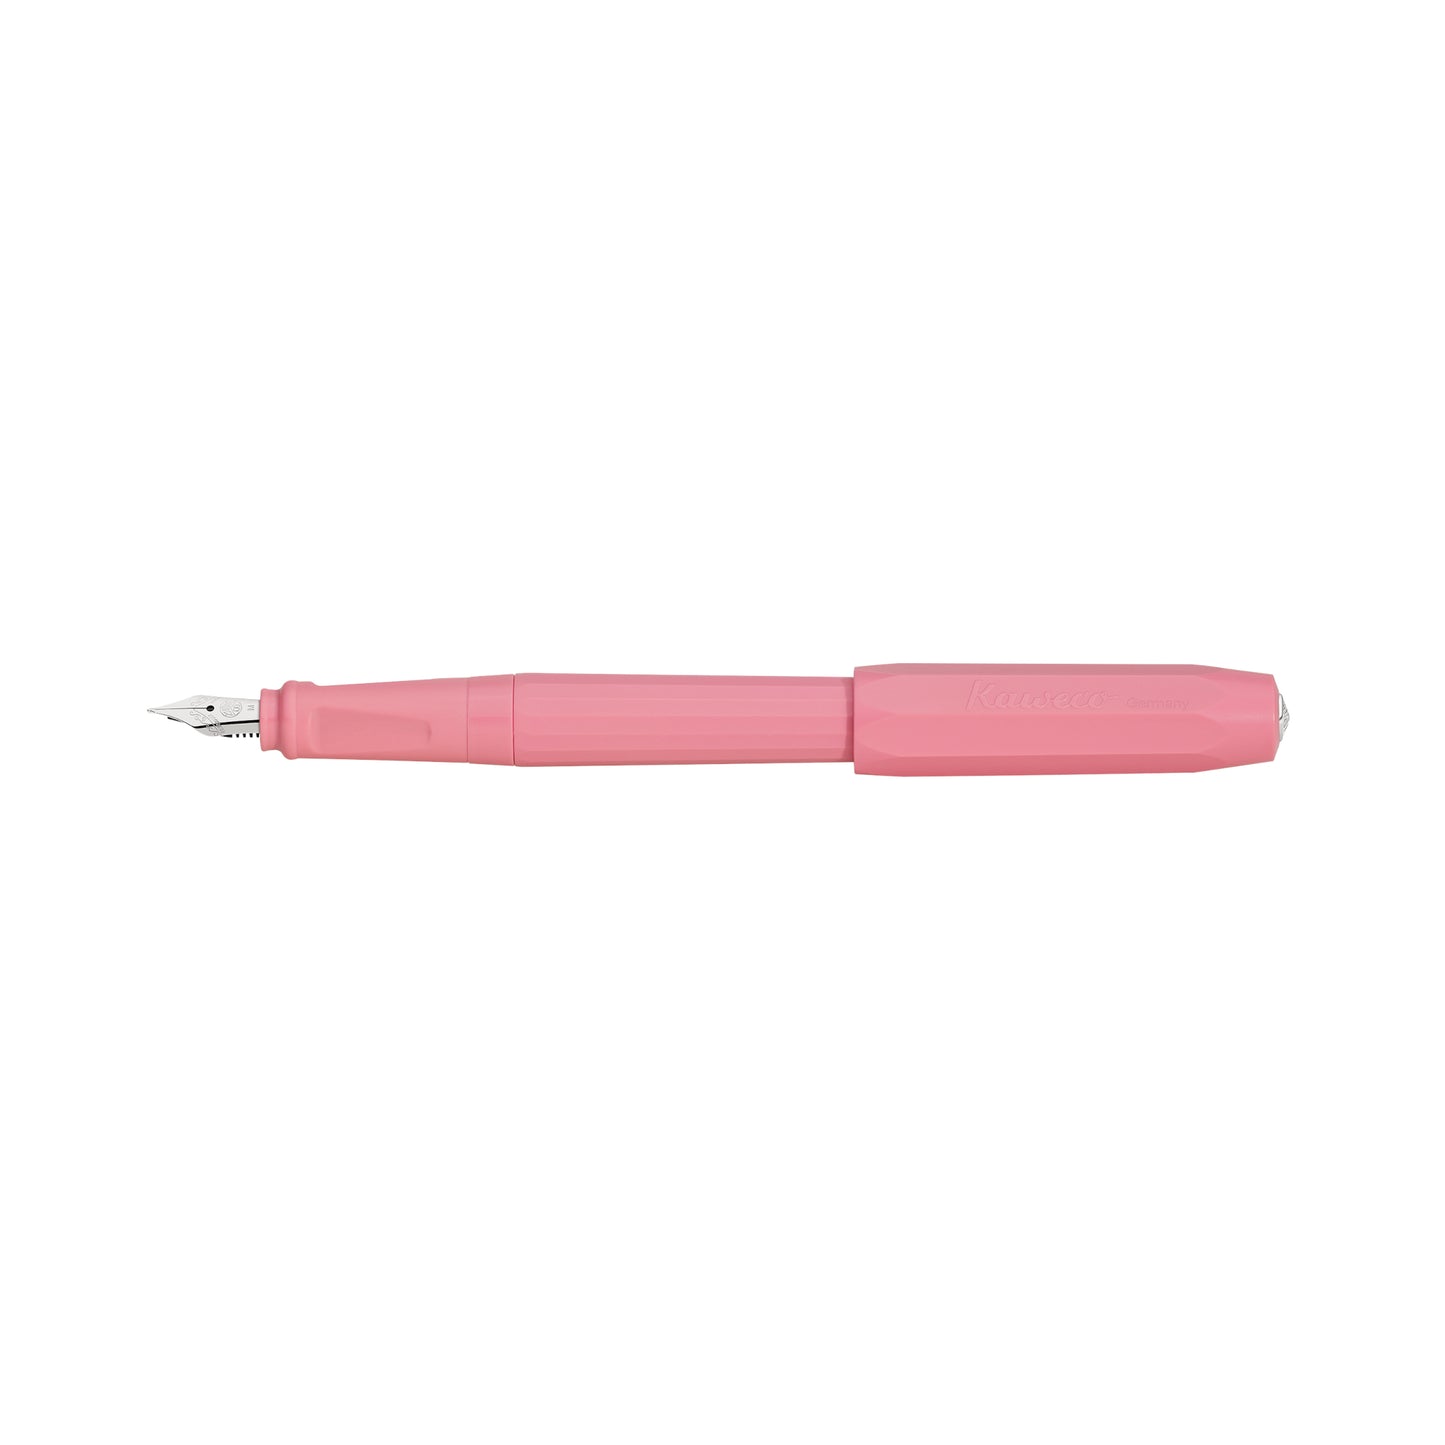 Kaweco Perkeo fountain pen in peony blossom pink colour, pictured with cap posted